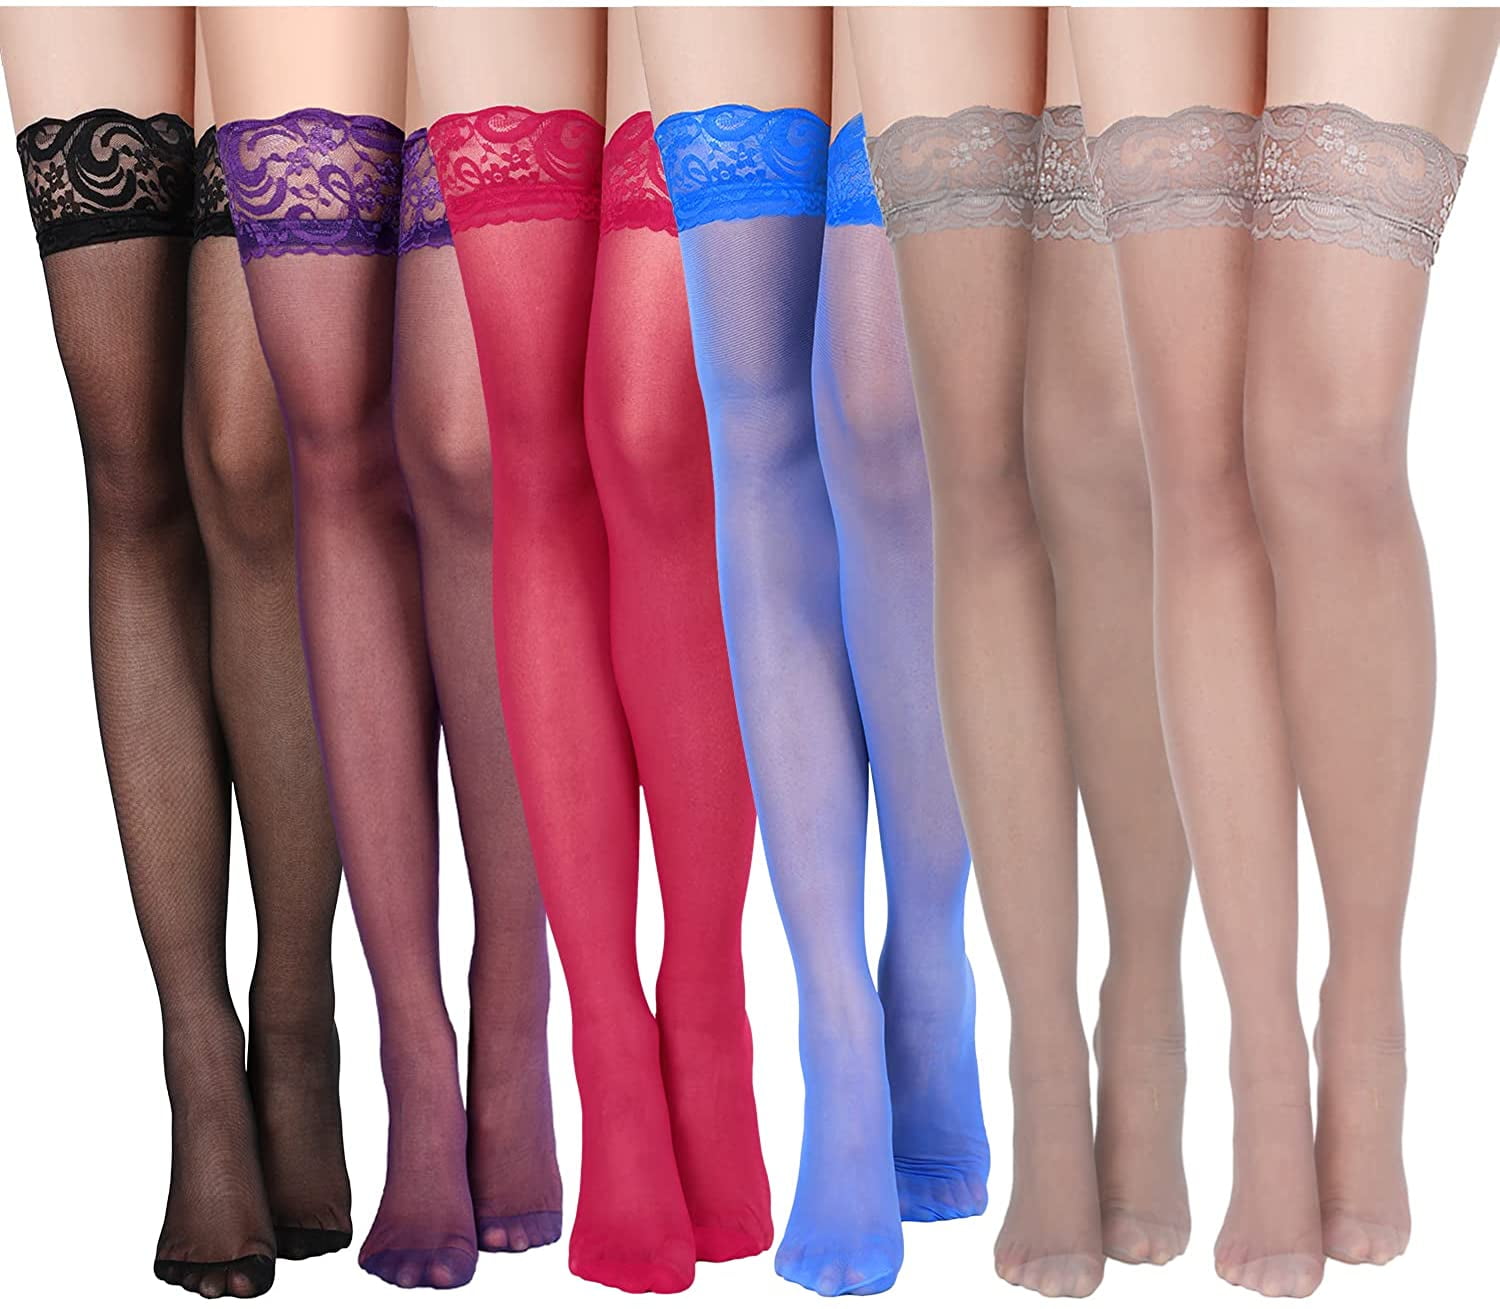 6 Pairs Thigh High Stockings Lace Tights Silky Semi Sheer Stocking